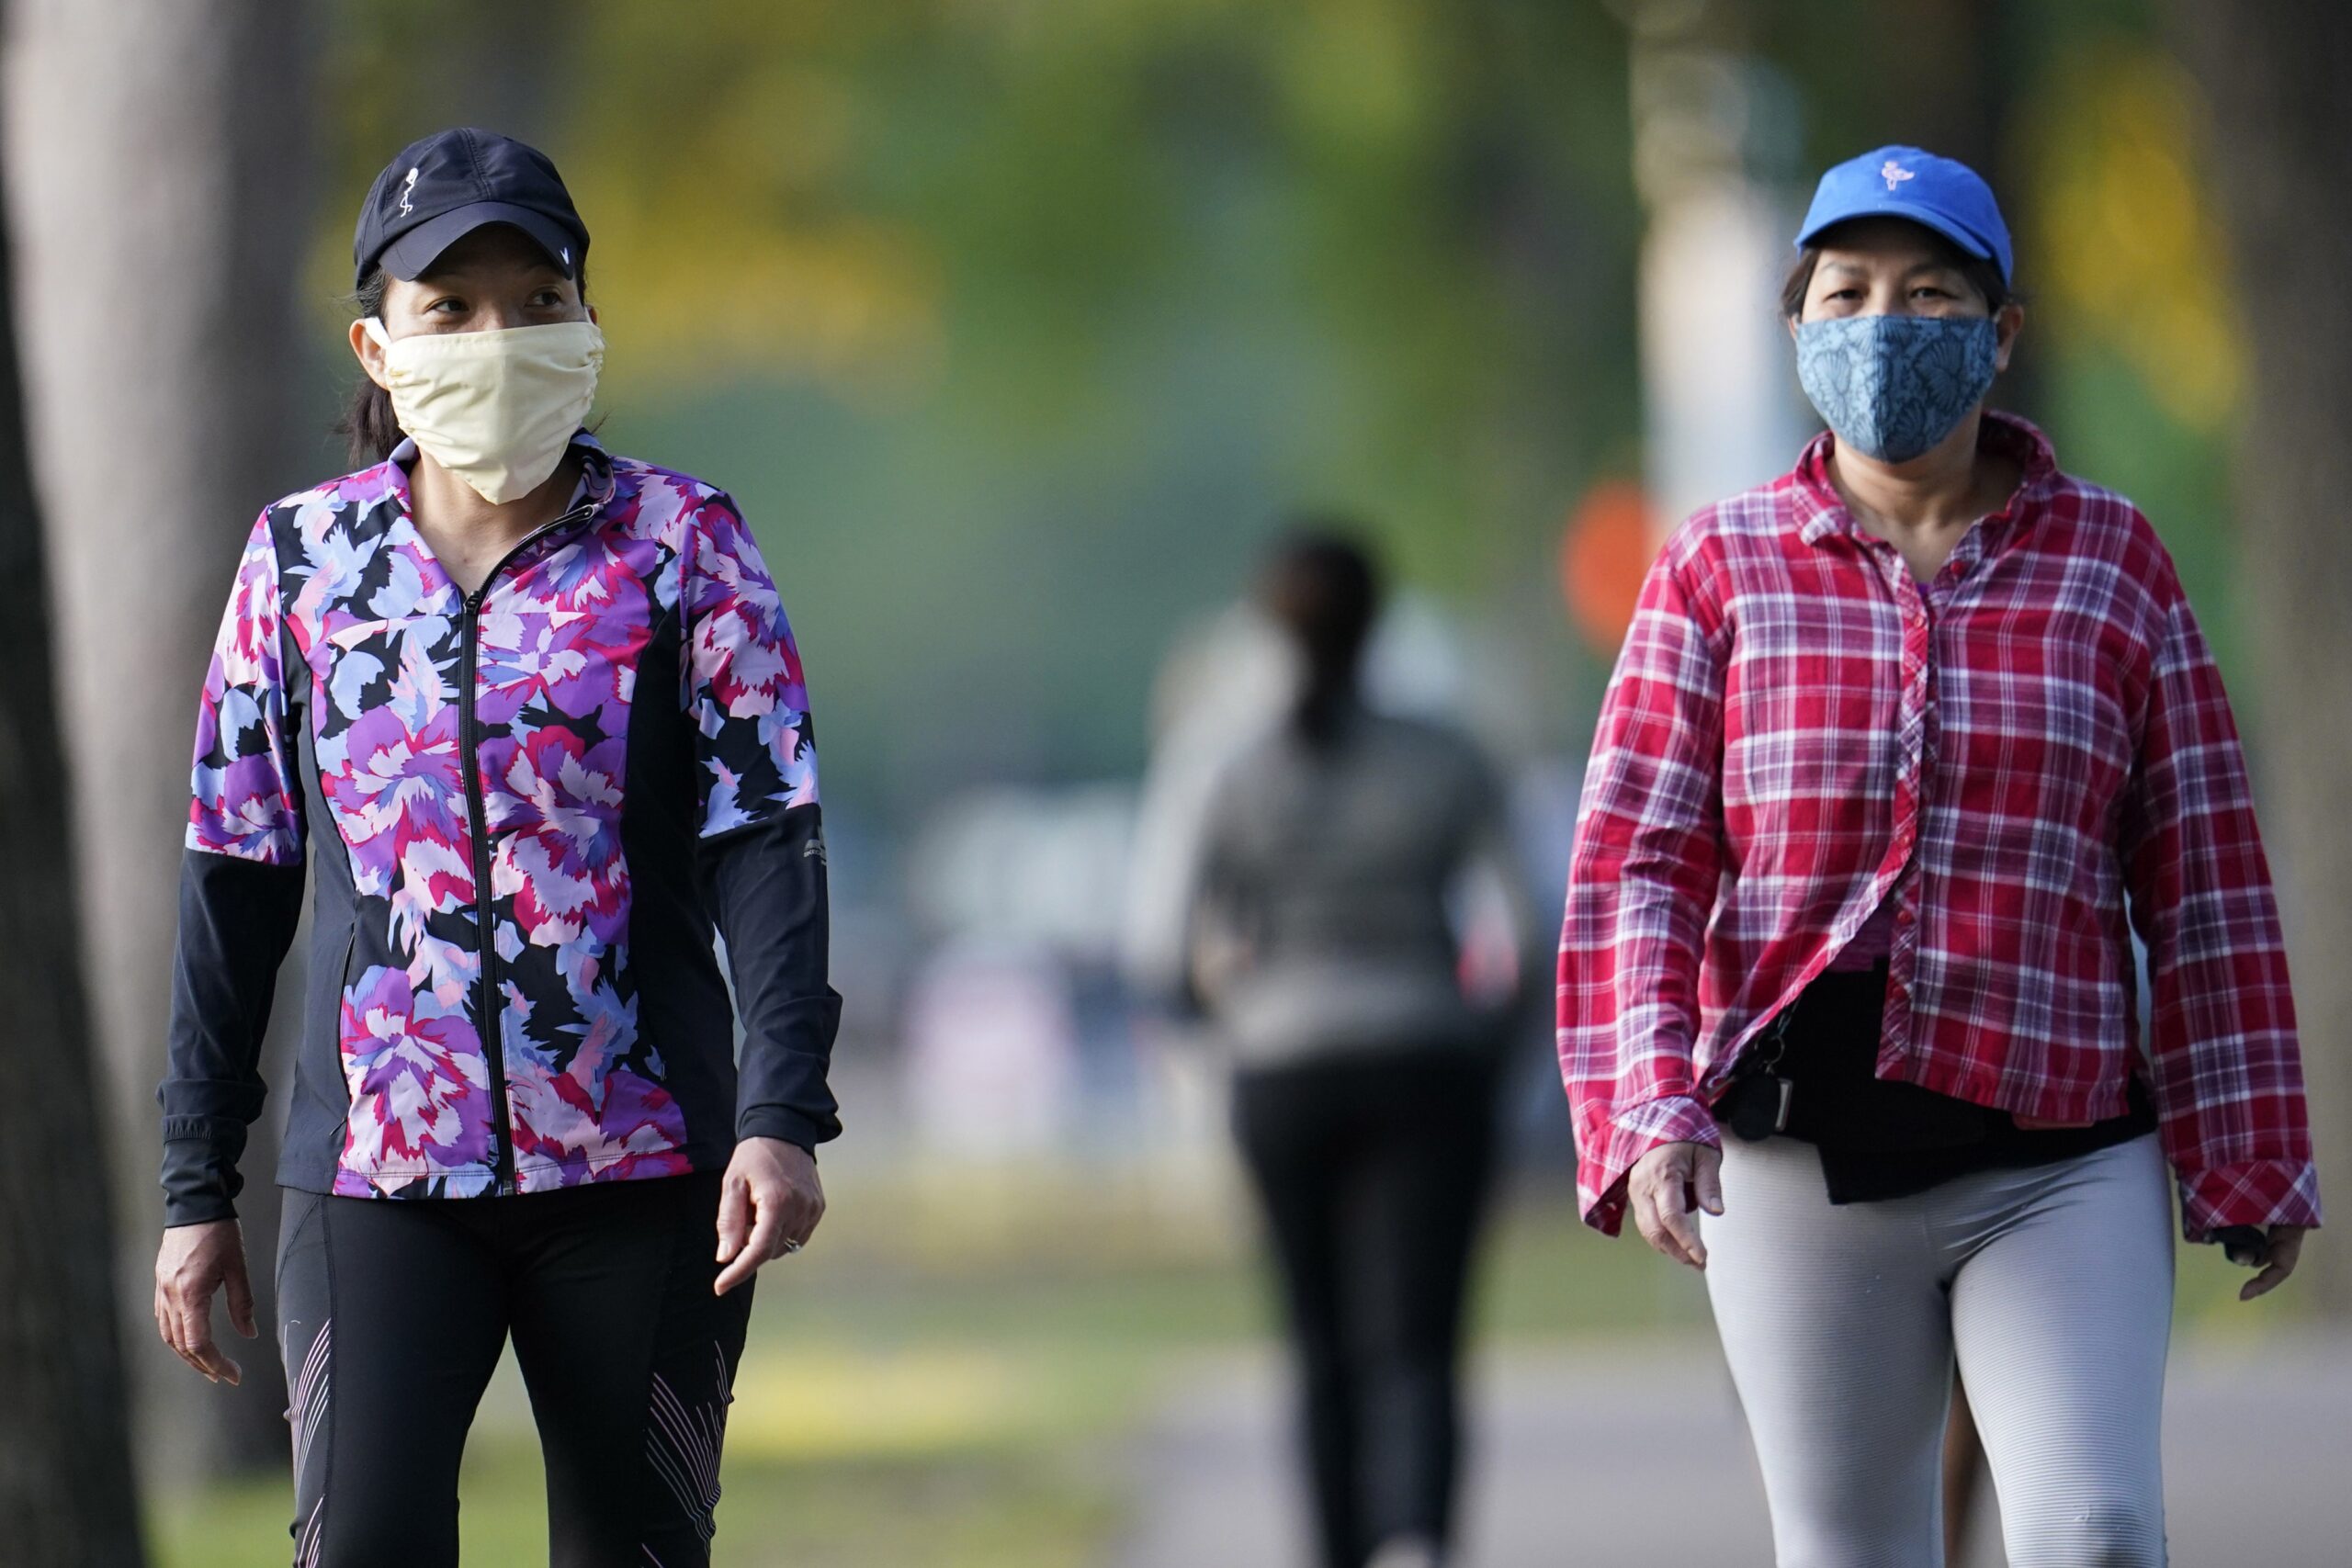 Thu Huynx and Trang Ngyen walk along a park trail while wearing face masks to help prevent the spread of COVID-19